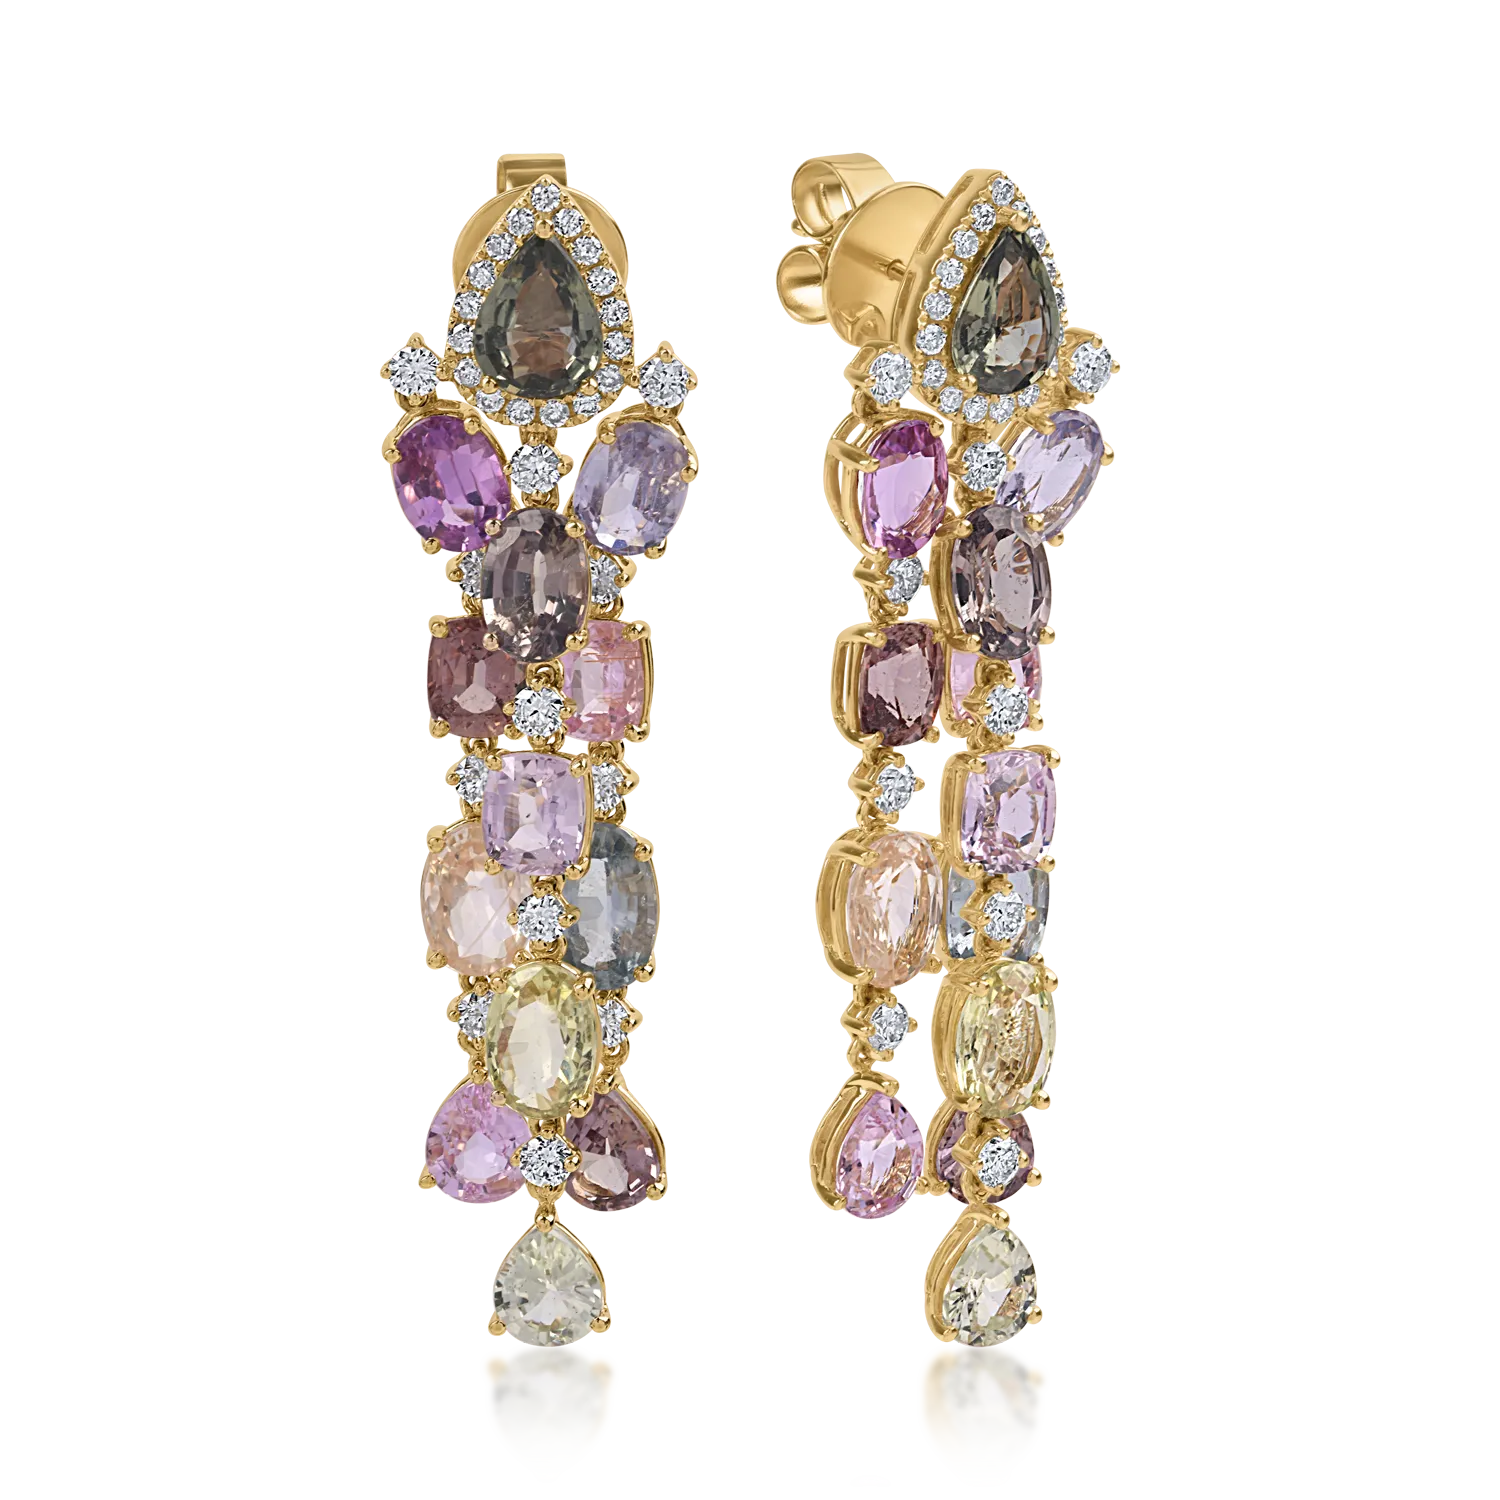 Yellow gold earrings with 21.69ct multicolored sapphires and 1.56ct diamonds